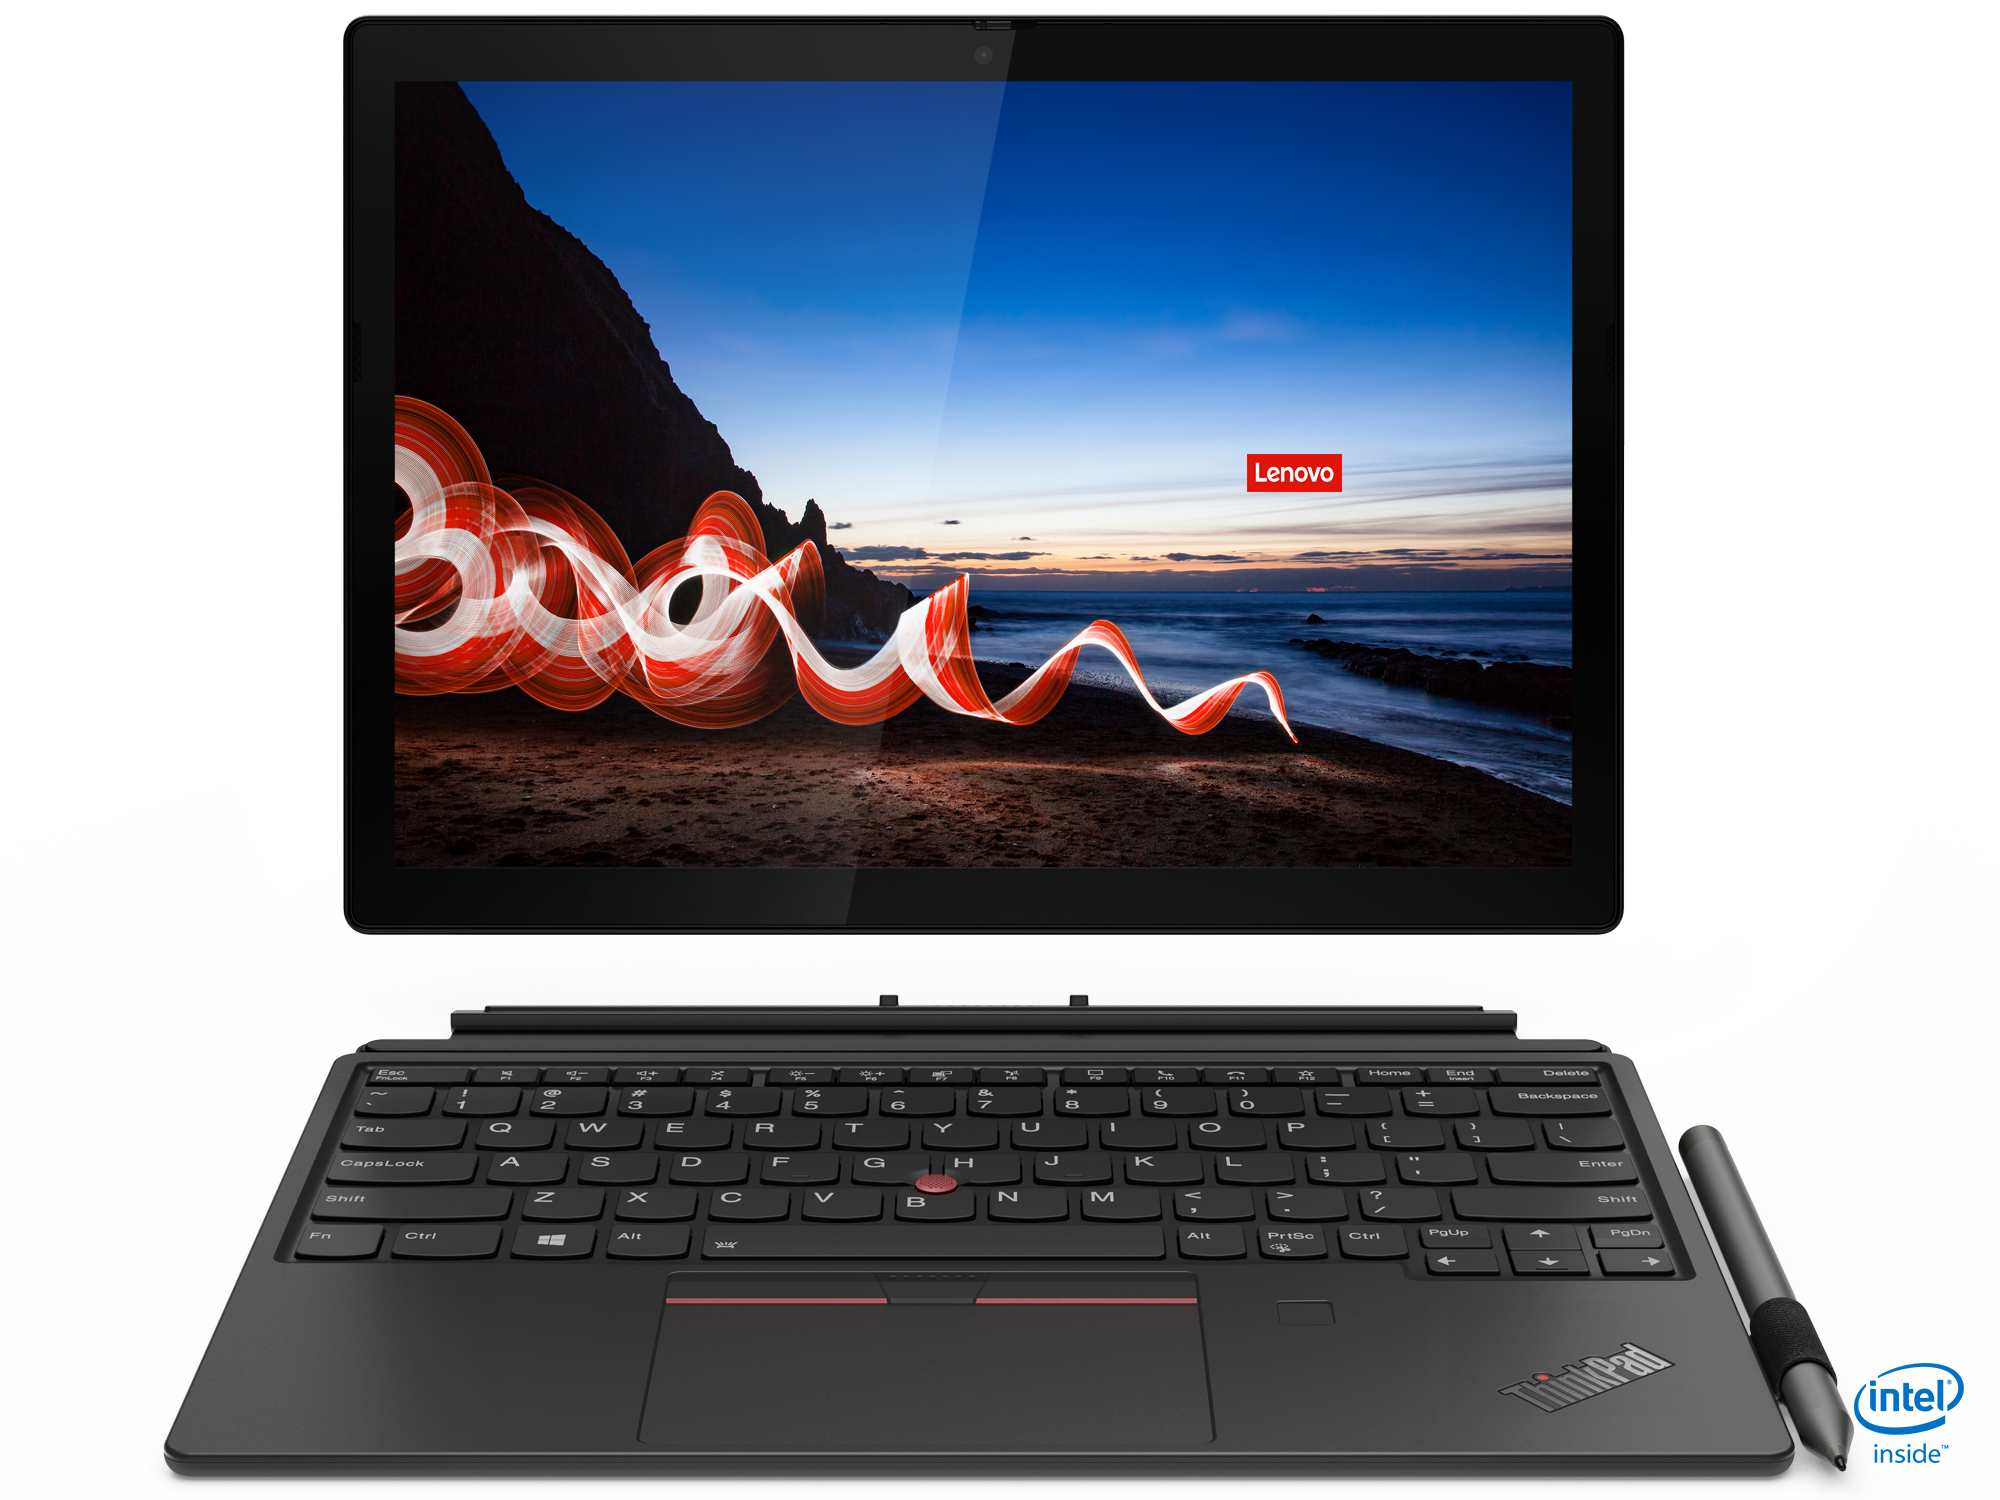 Lenovo CES 2021 ThinkPad X1 Lineup: New Designs, New Displays for